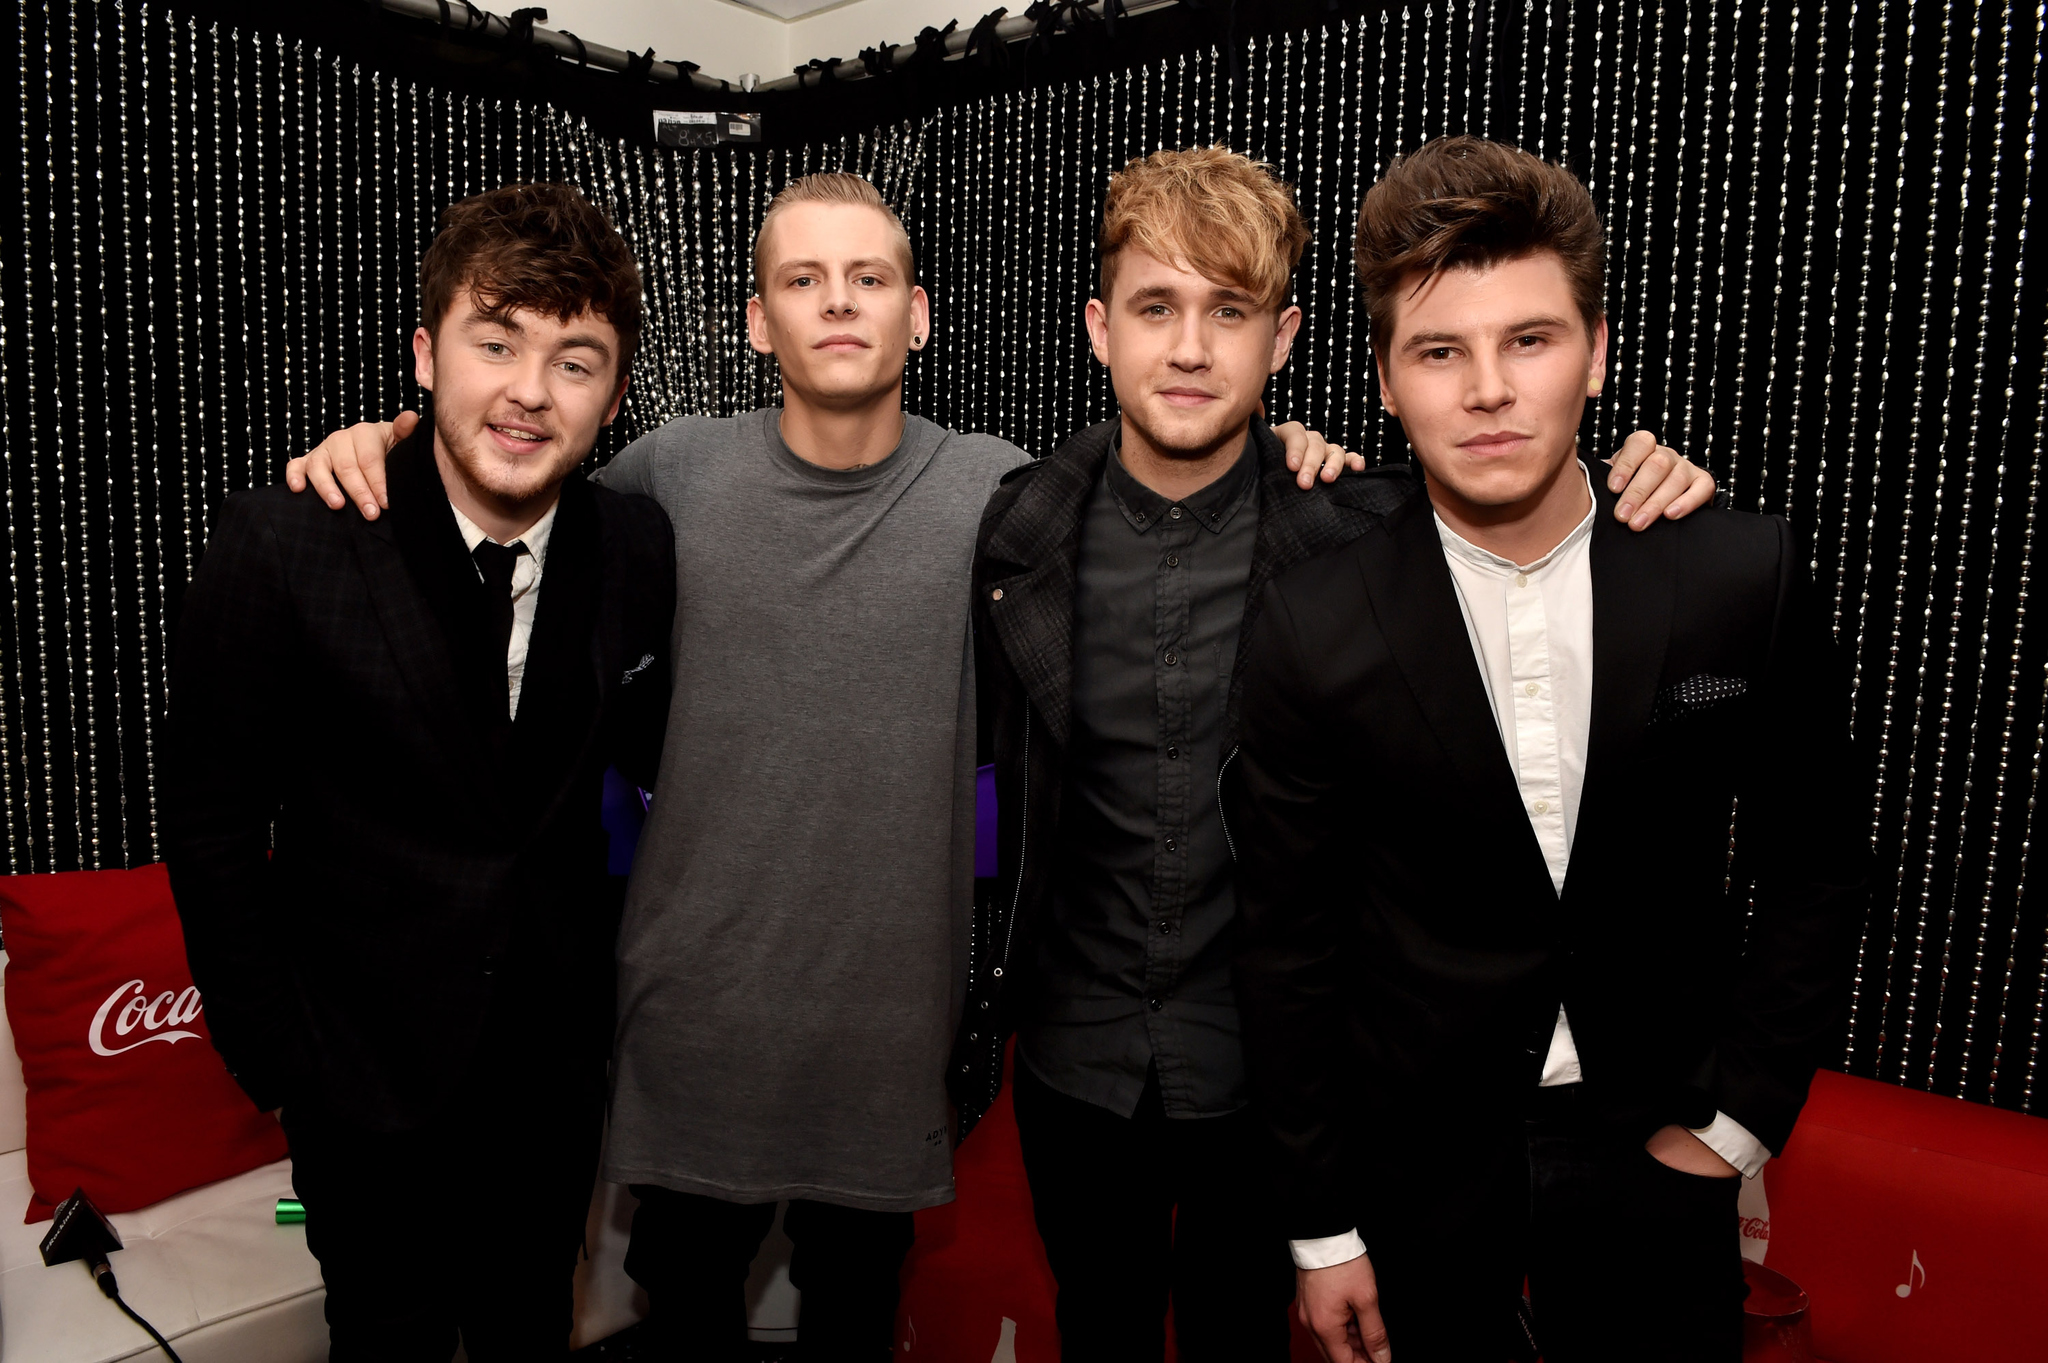 Jake Roche, Lewi Morgan, Danny Wilkin and Charley Bagnall at event of Dick Clark's Primetime New Year's Rockin' Eve with Ryan Seacrest 2015 (2014)